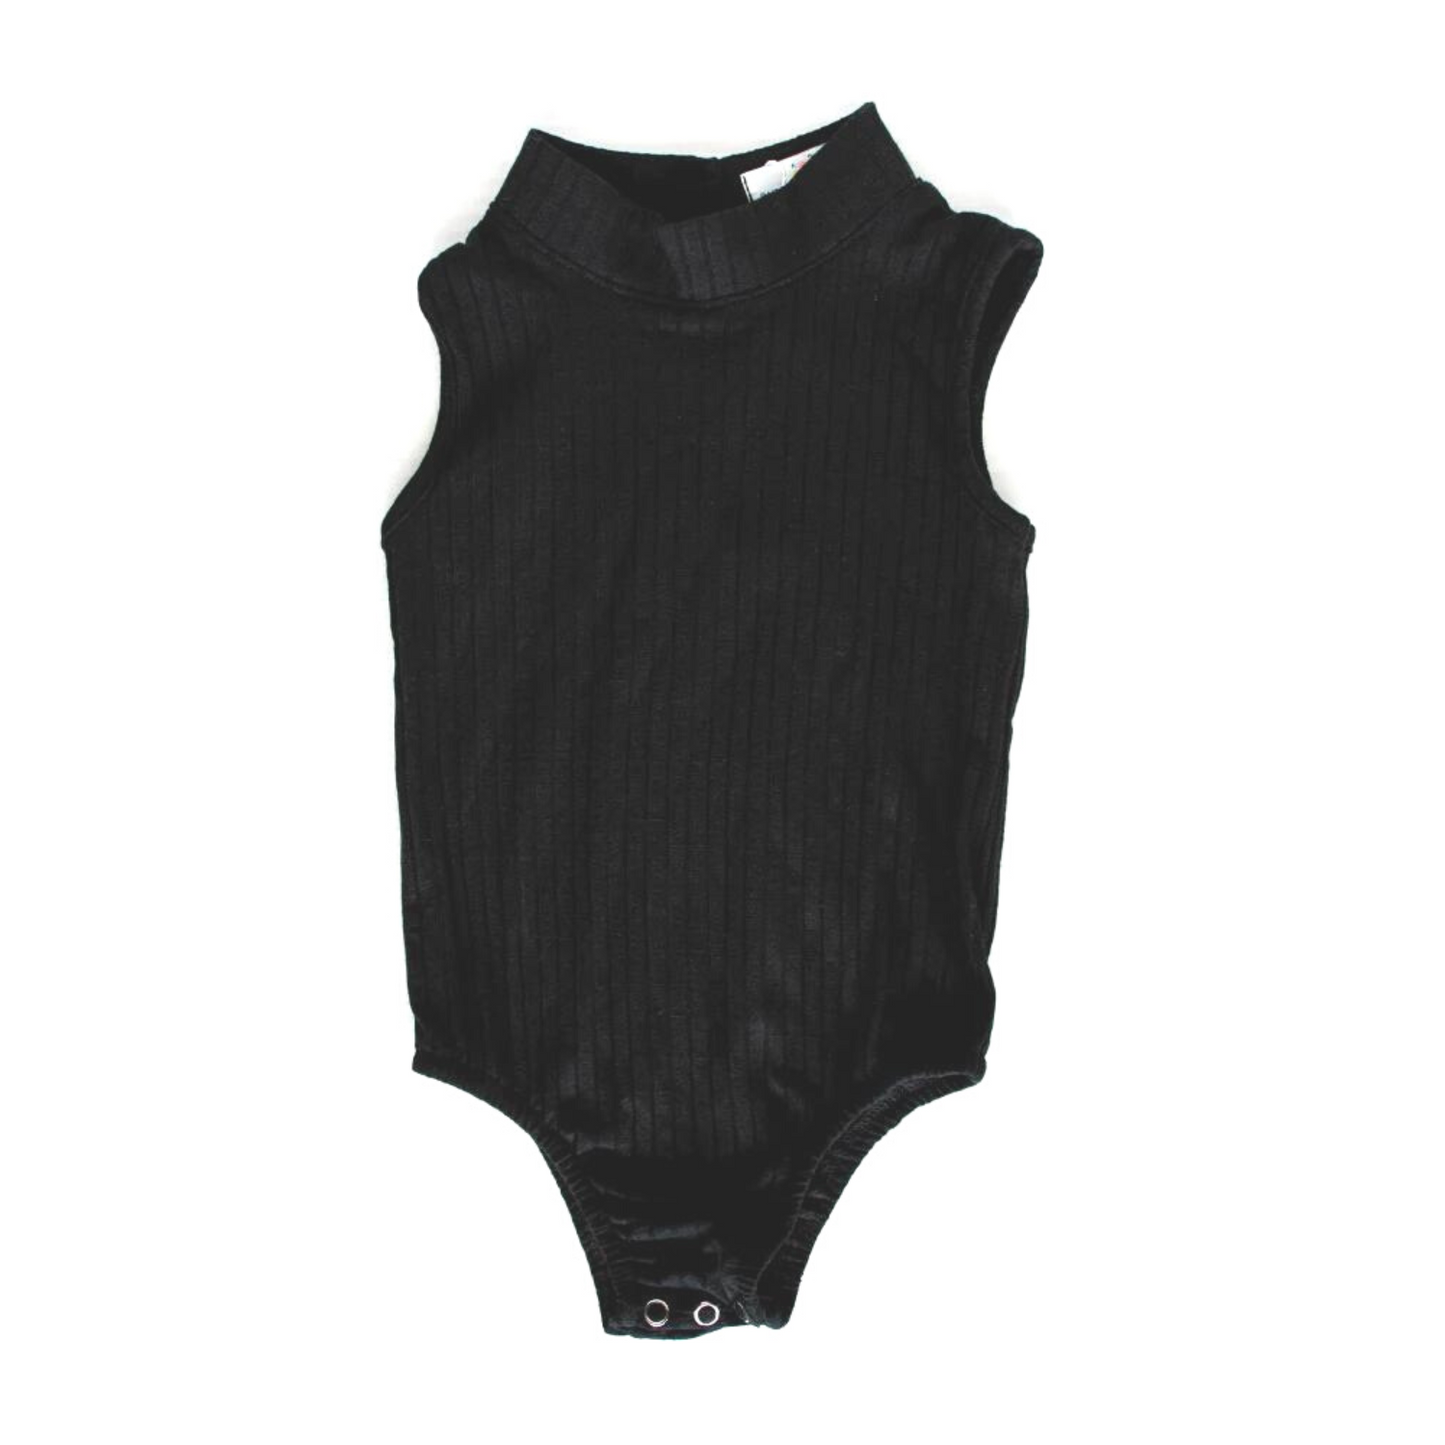 Your favorite Black High Neck Ribbed Bodysuit is back! With a high neck and a ribbed fabric, it's a go-to layer all year. Pair it with a cute mini skirt or a pair of our bell bottoms to really make a statement this season!  93% Rayon, 7% Spandex.  Machine Wash Cold, Lay Flat To Dry.  Women Owned.